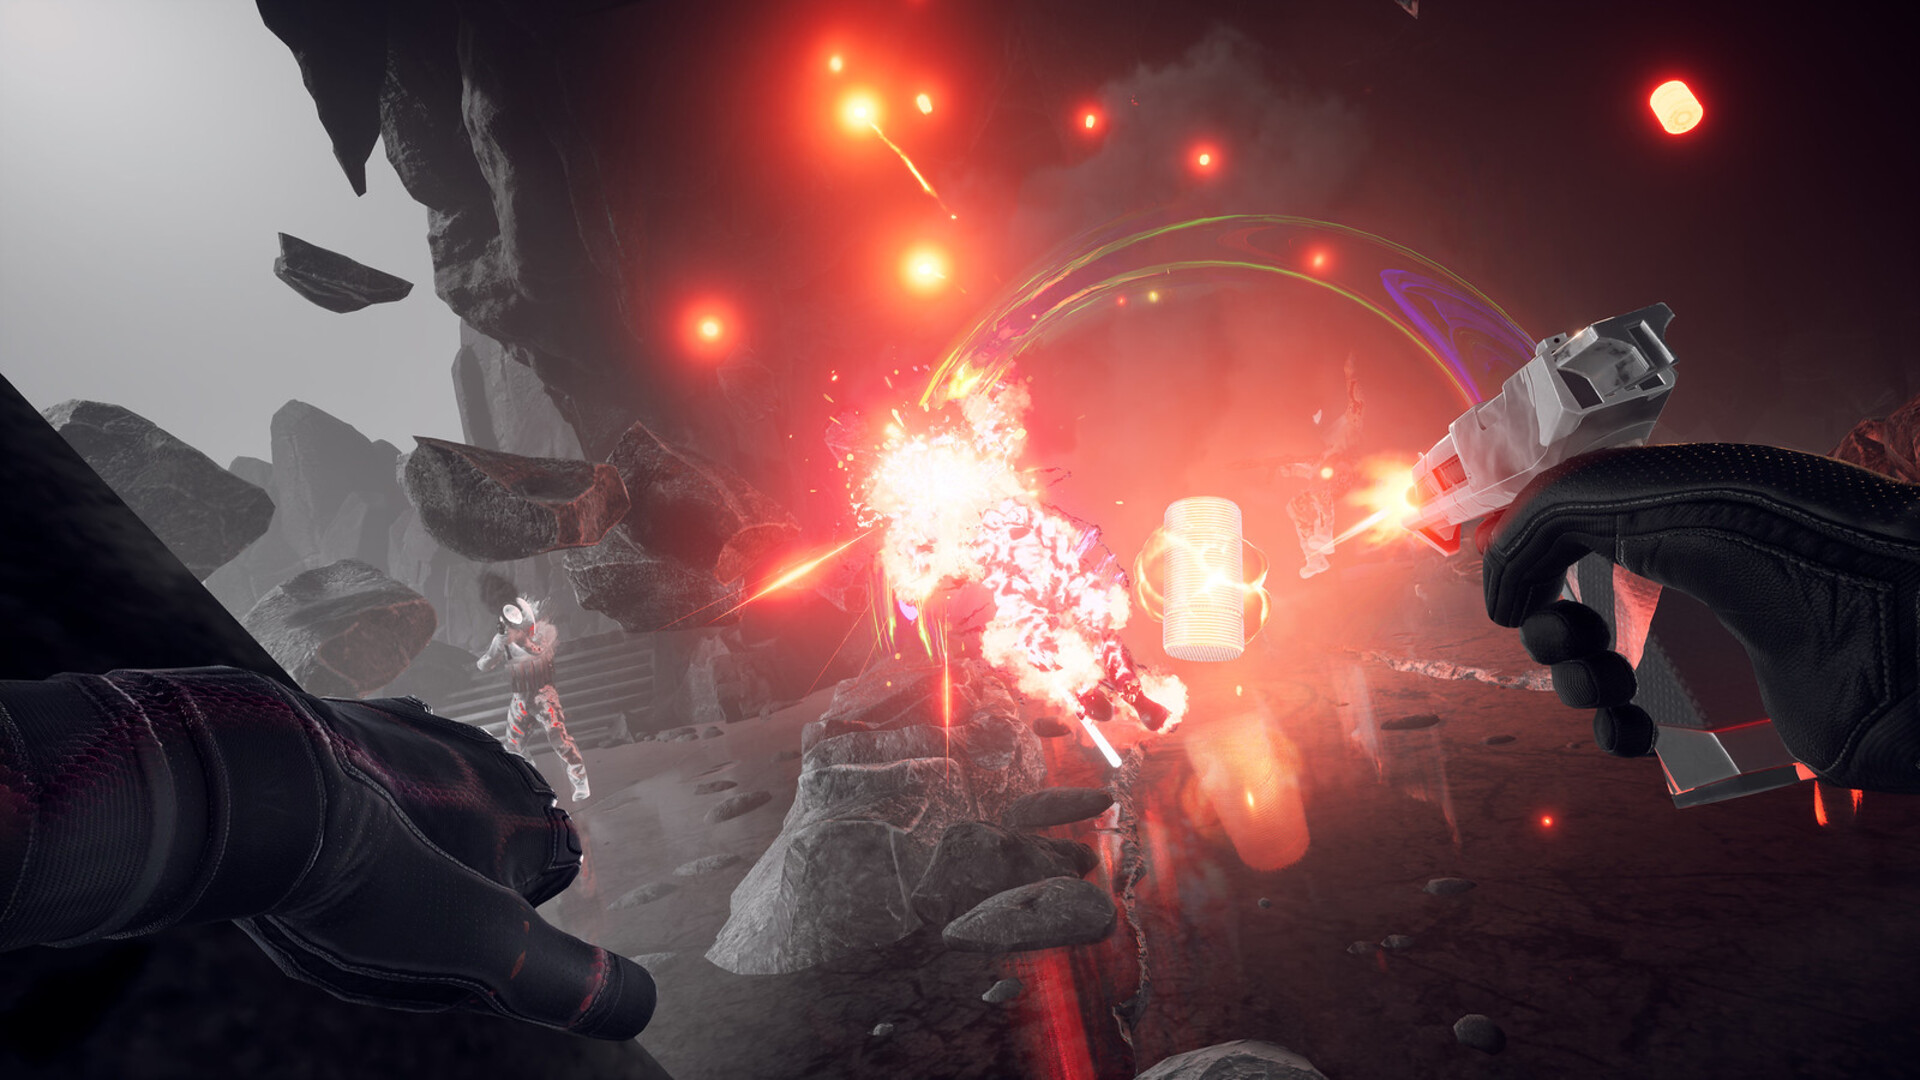 The player detonates a barrel while firing their pistol in Synapse